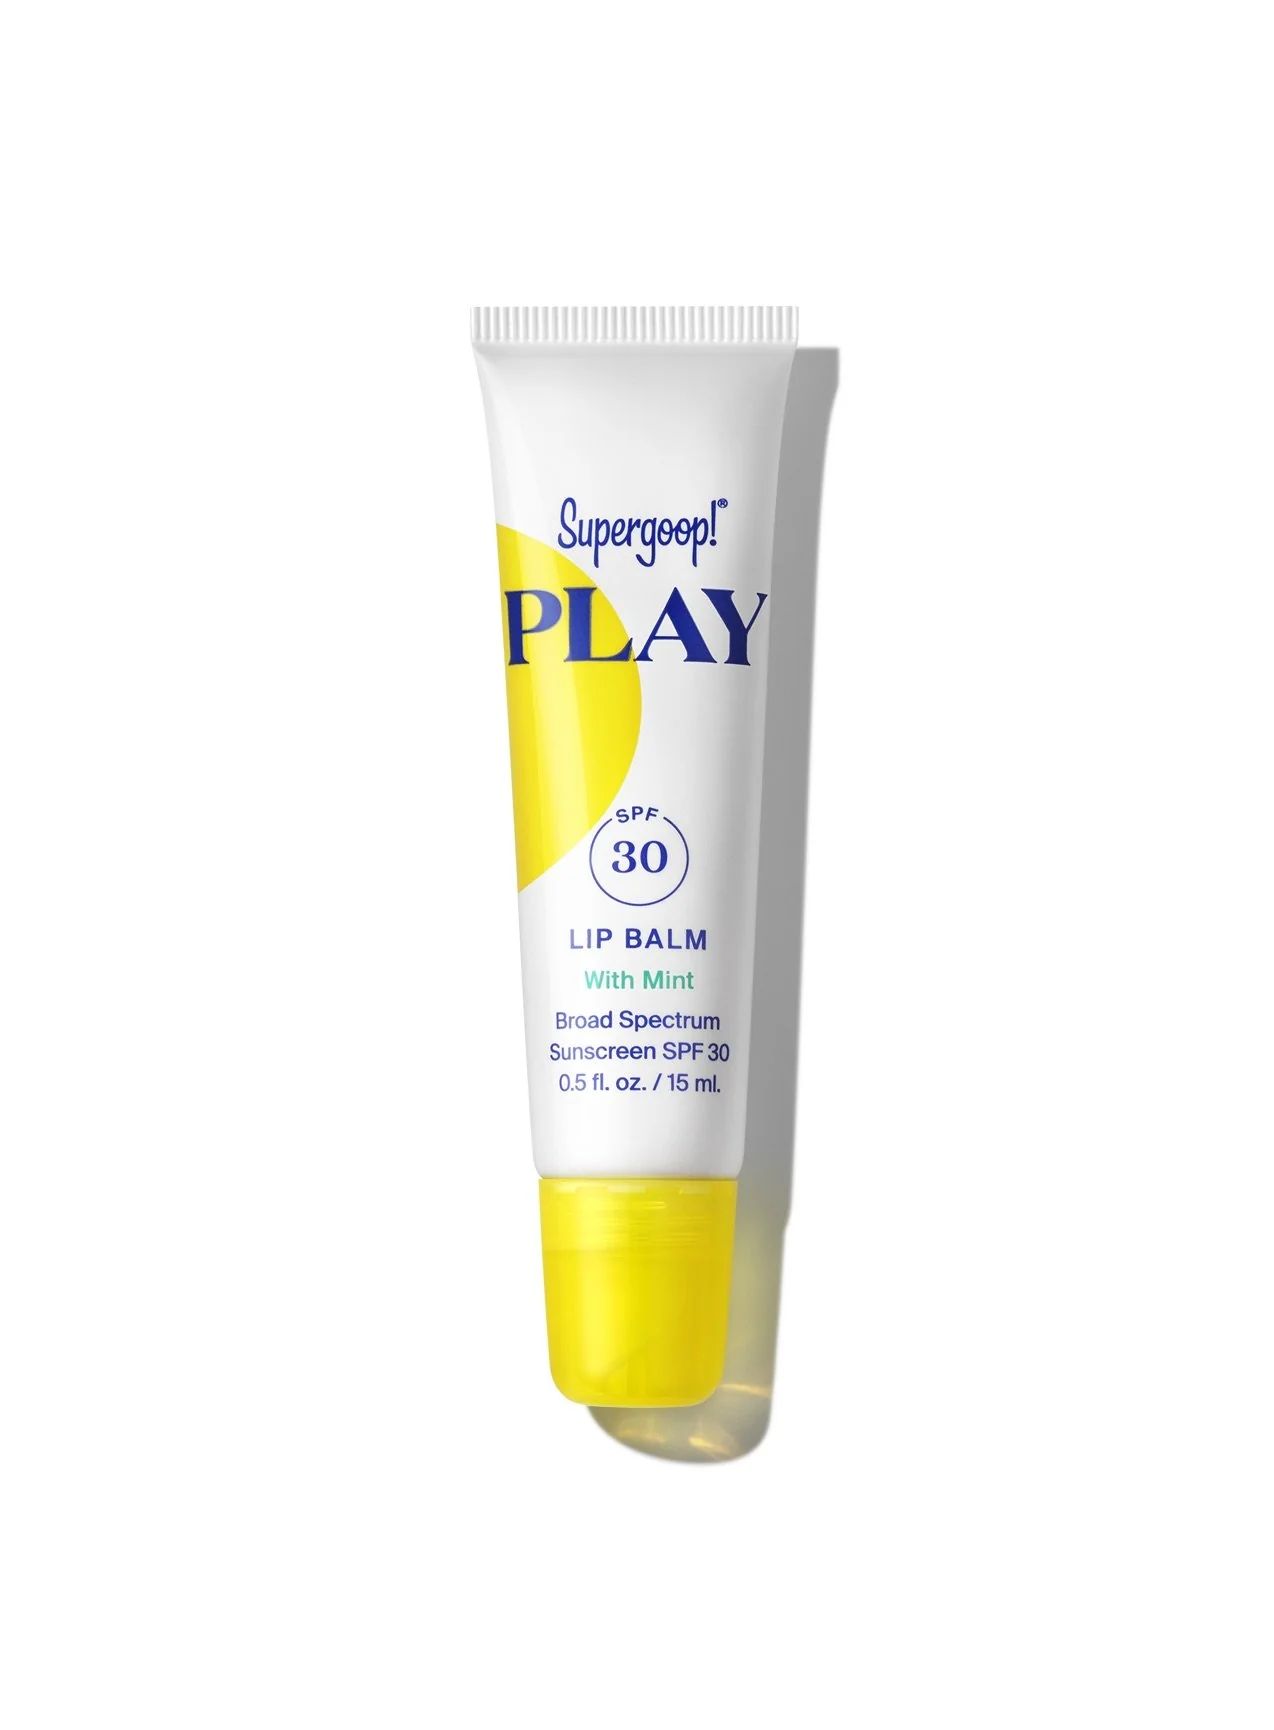 PLAY Lip Balm SPF 30 with Mint | Supergoop